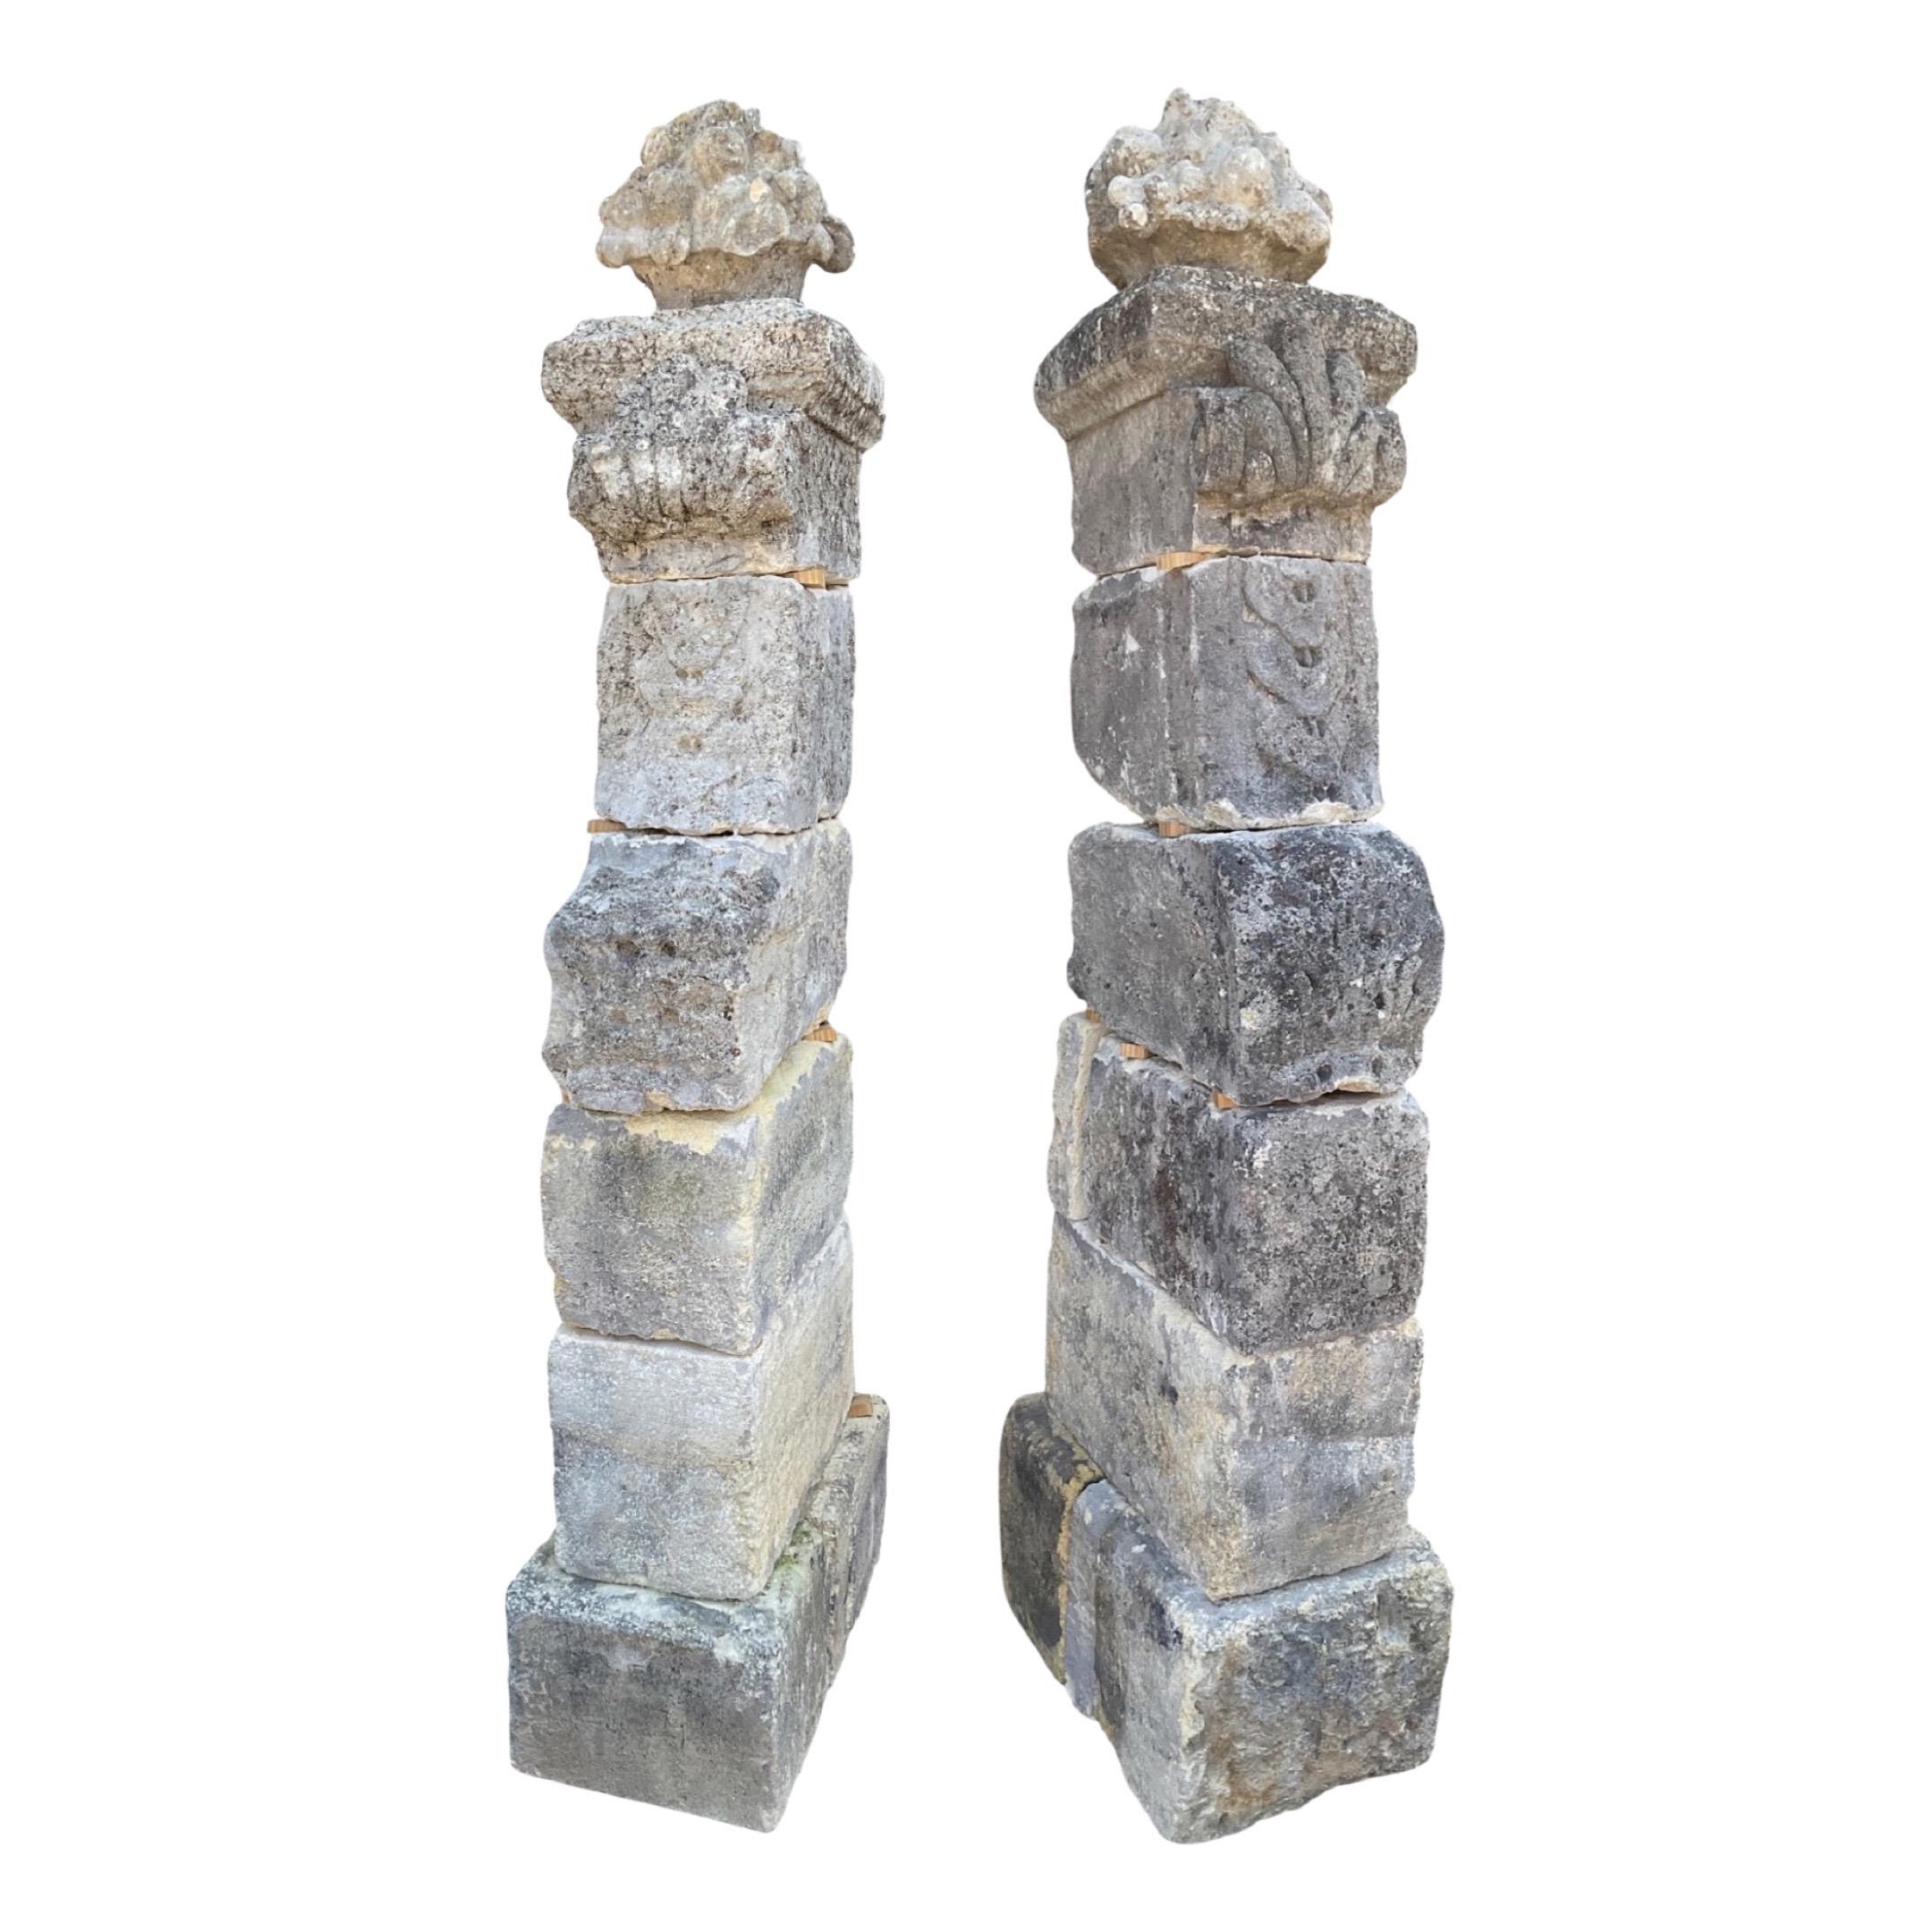 Add an elegant touch to any outdoor space with these stunning French Limestone Columns. Handcrafted in 17th century Bordeaux, France, these twin columns feature intricate carvings for a unique, eye-catching look. Enhance your outdoor area with